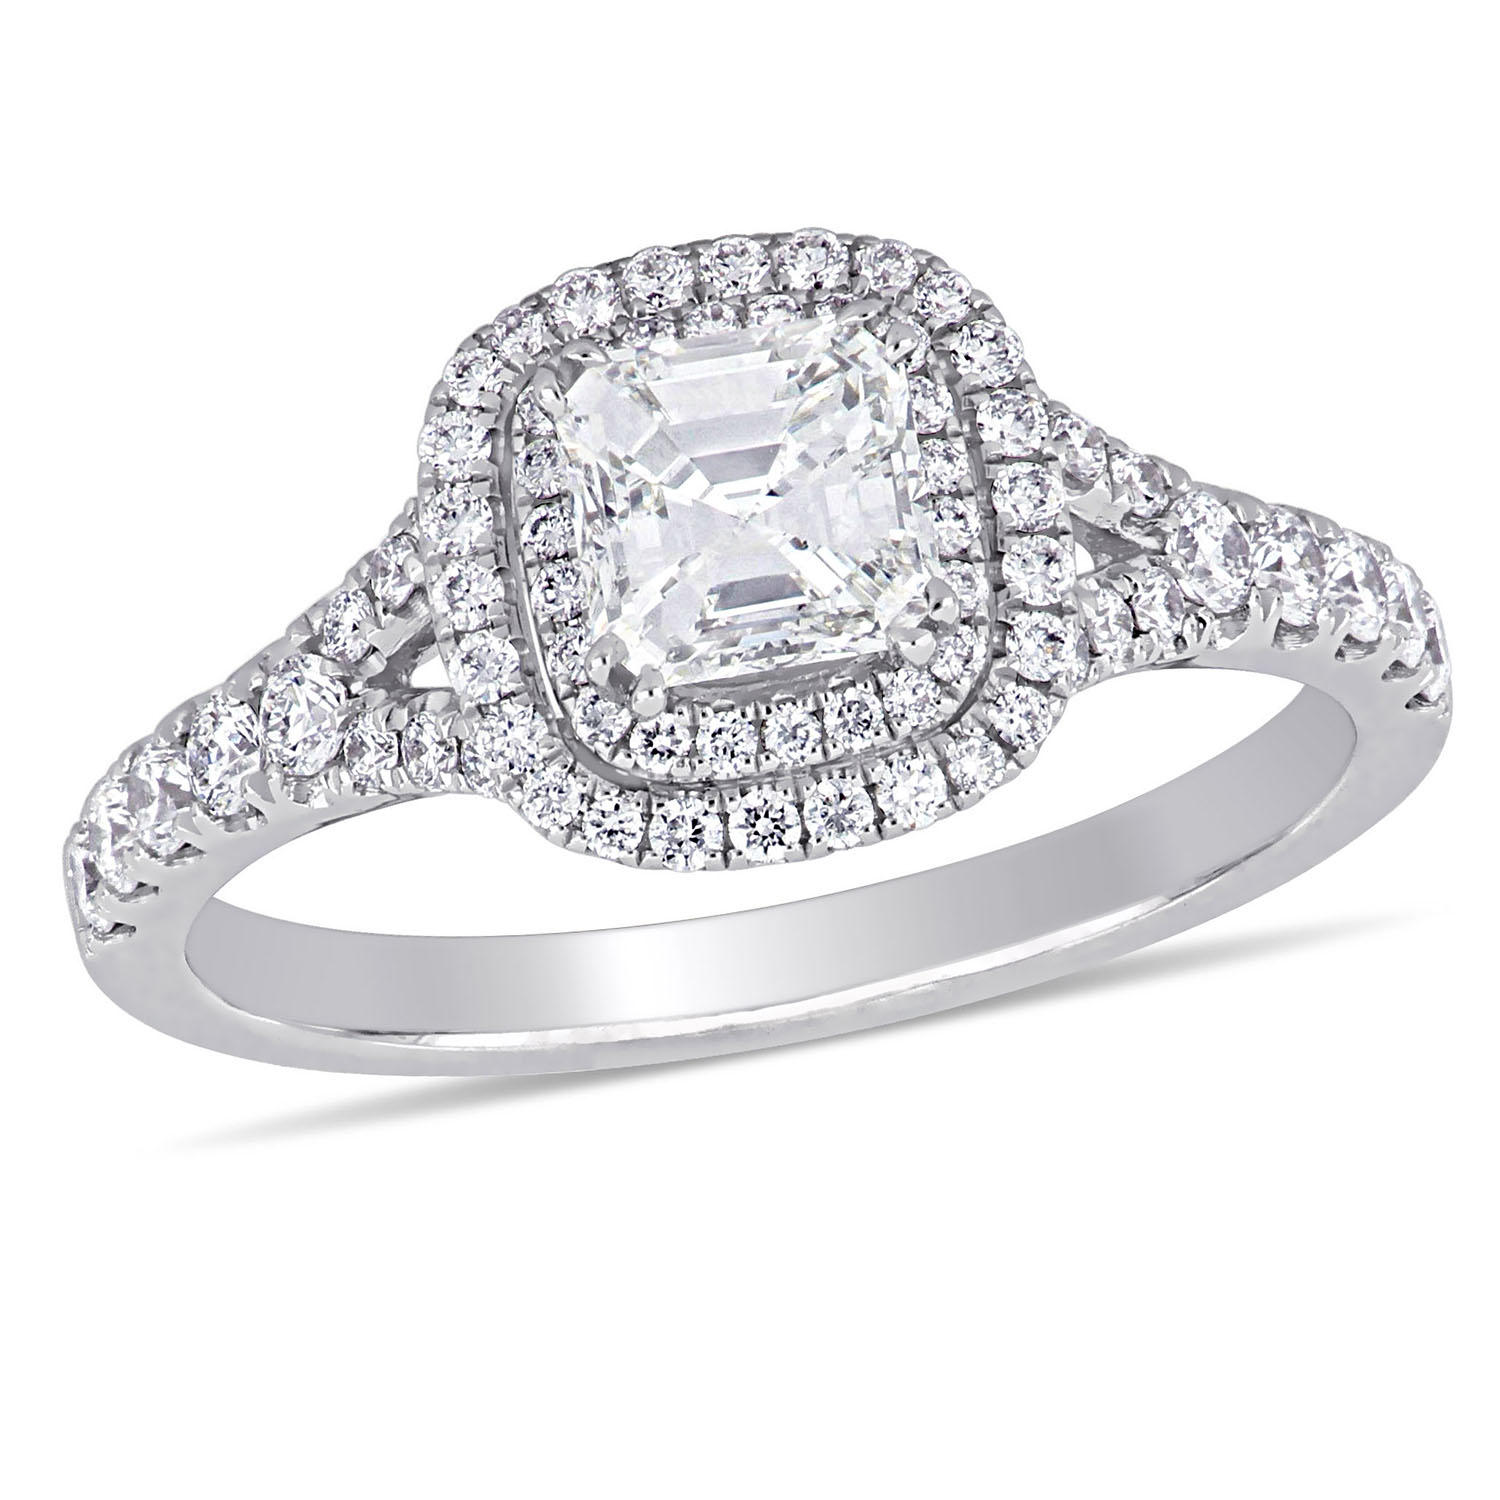 Allura 1.18 CT Asscher and Round-Cut Diamonds Double Halo Engagement Ring in 14k White Gold